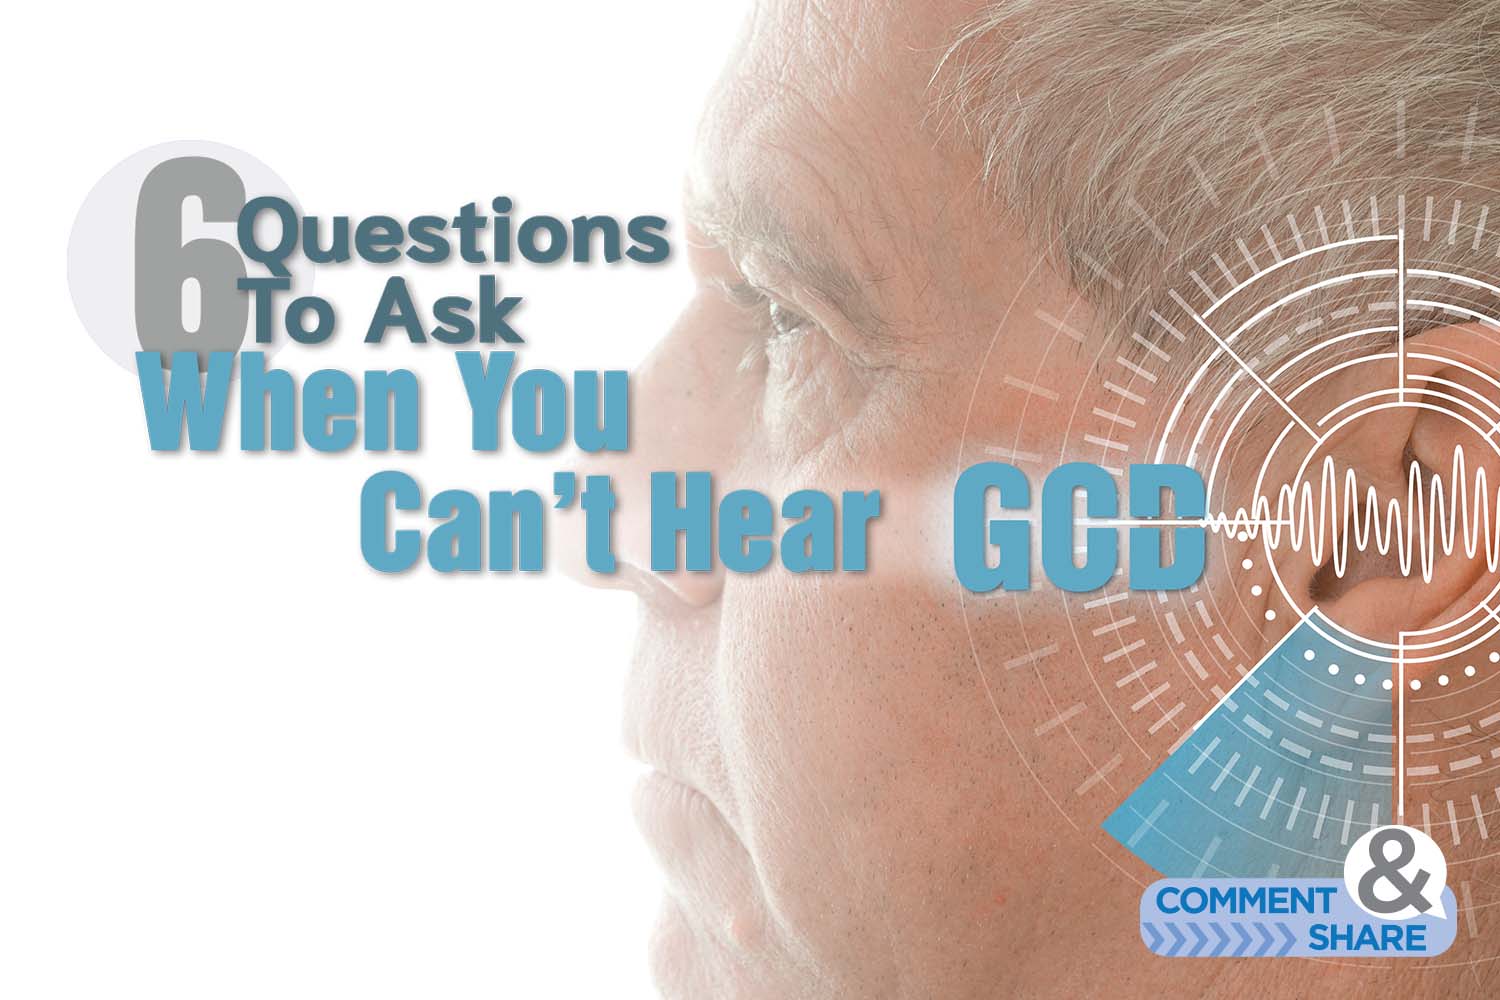 Questions to Ask When You Can't Hear God